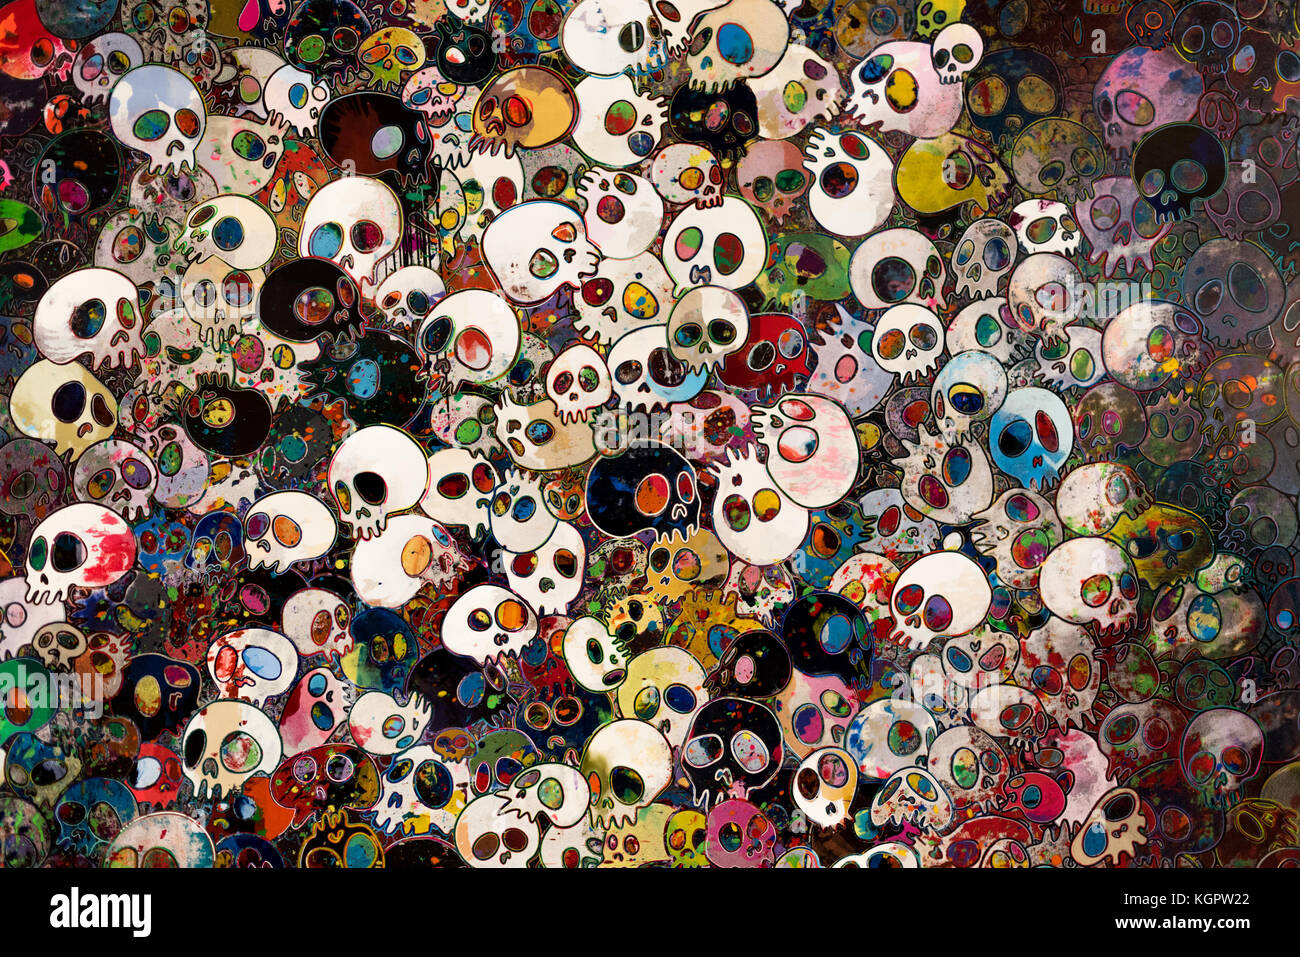 A picture I took at the Takashi Murakami Gallery at the Louis Vuitton  foundation in Paris. Its a square but I cropped for my wallpaper and it  looks reallly nice thought you